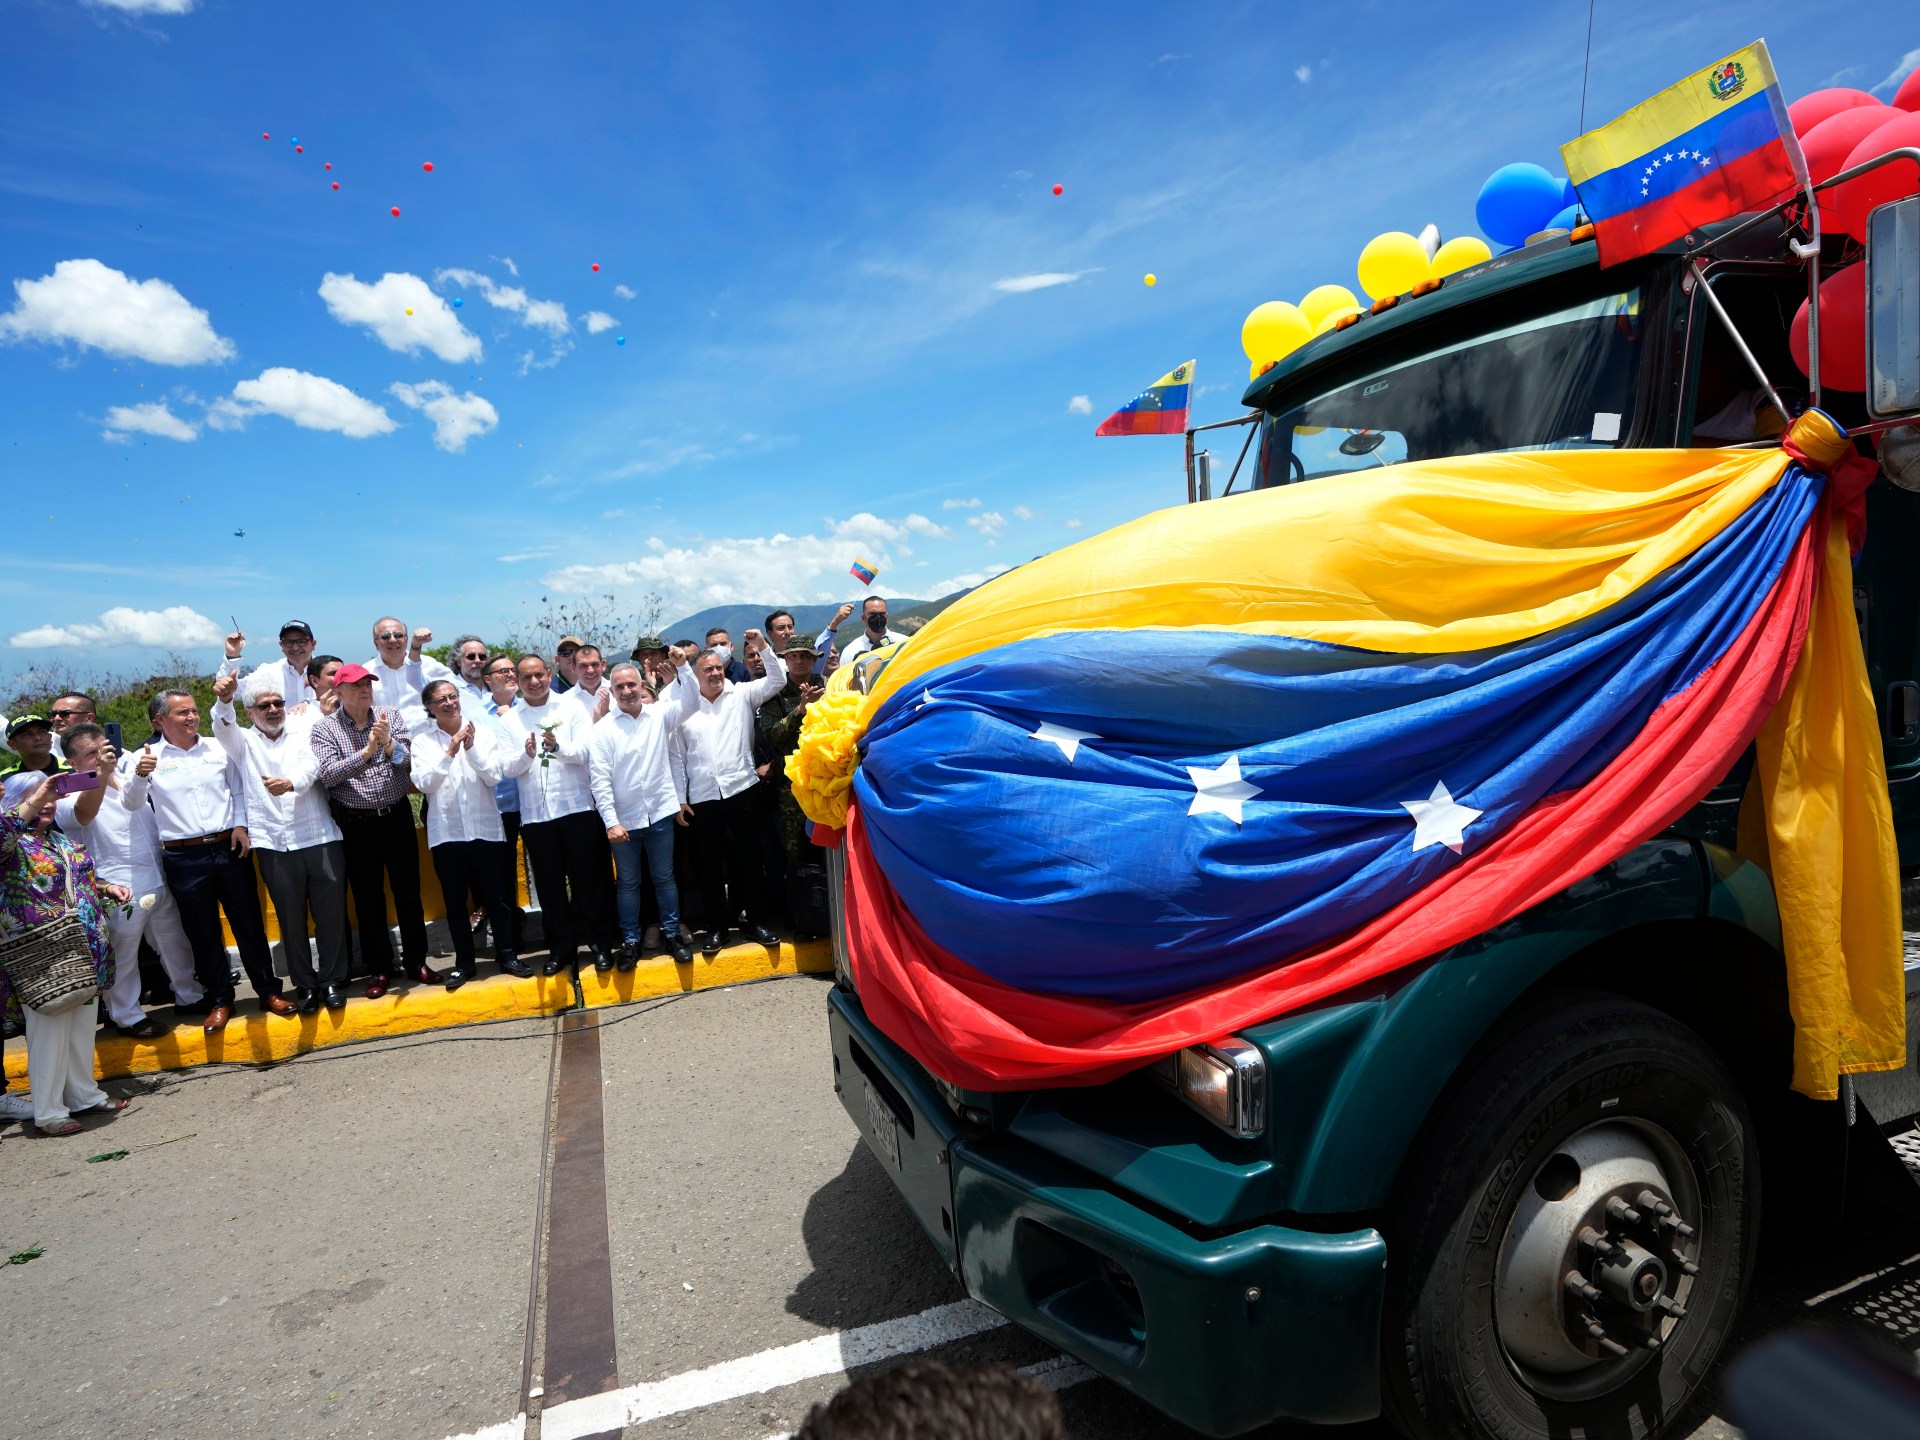 Venezuela-Colombia border reopens to trade as tensions ease